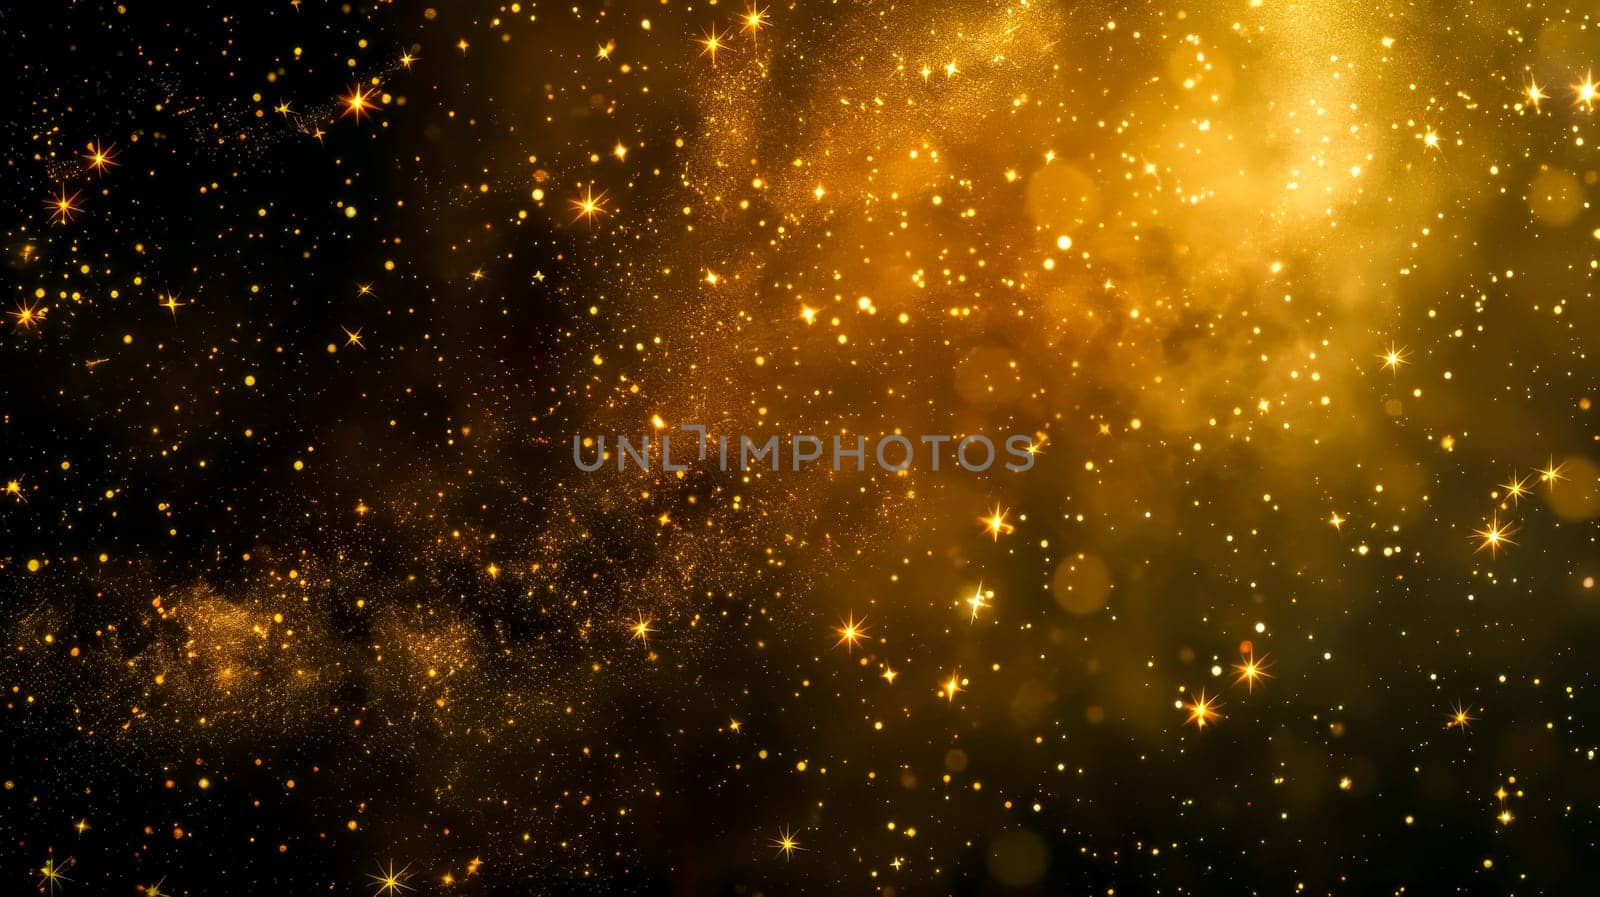 Luxurious golden sparkling dust abstract background with shimmering bokeh particles and glowing light, perfect for festive celebrations and creating a magical atmosphere